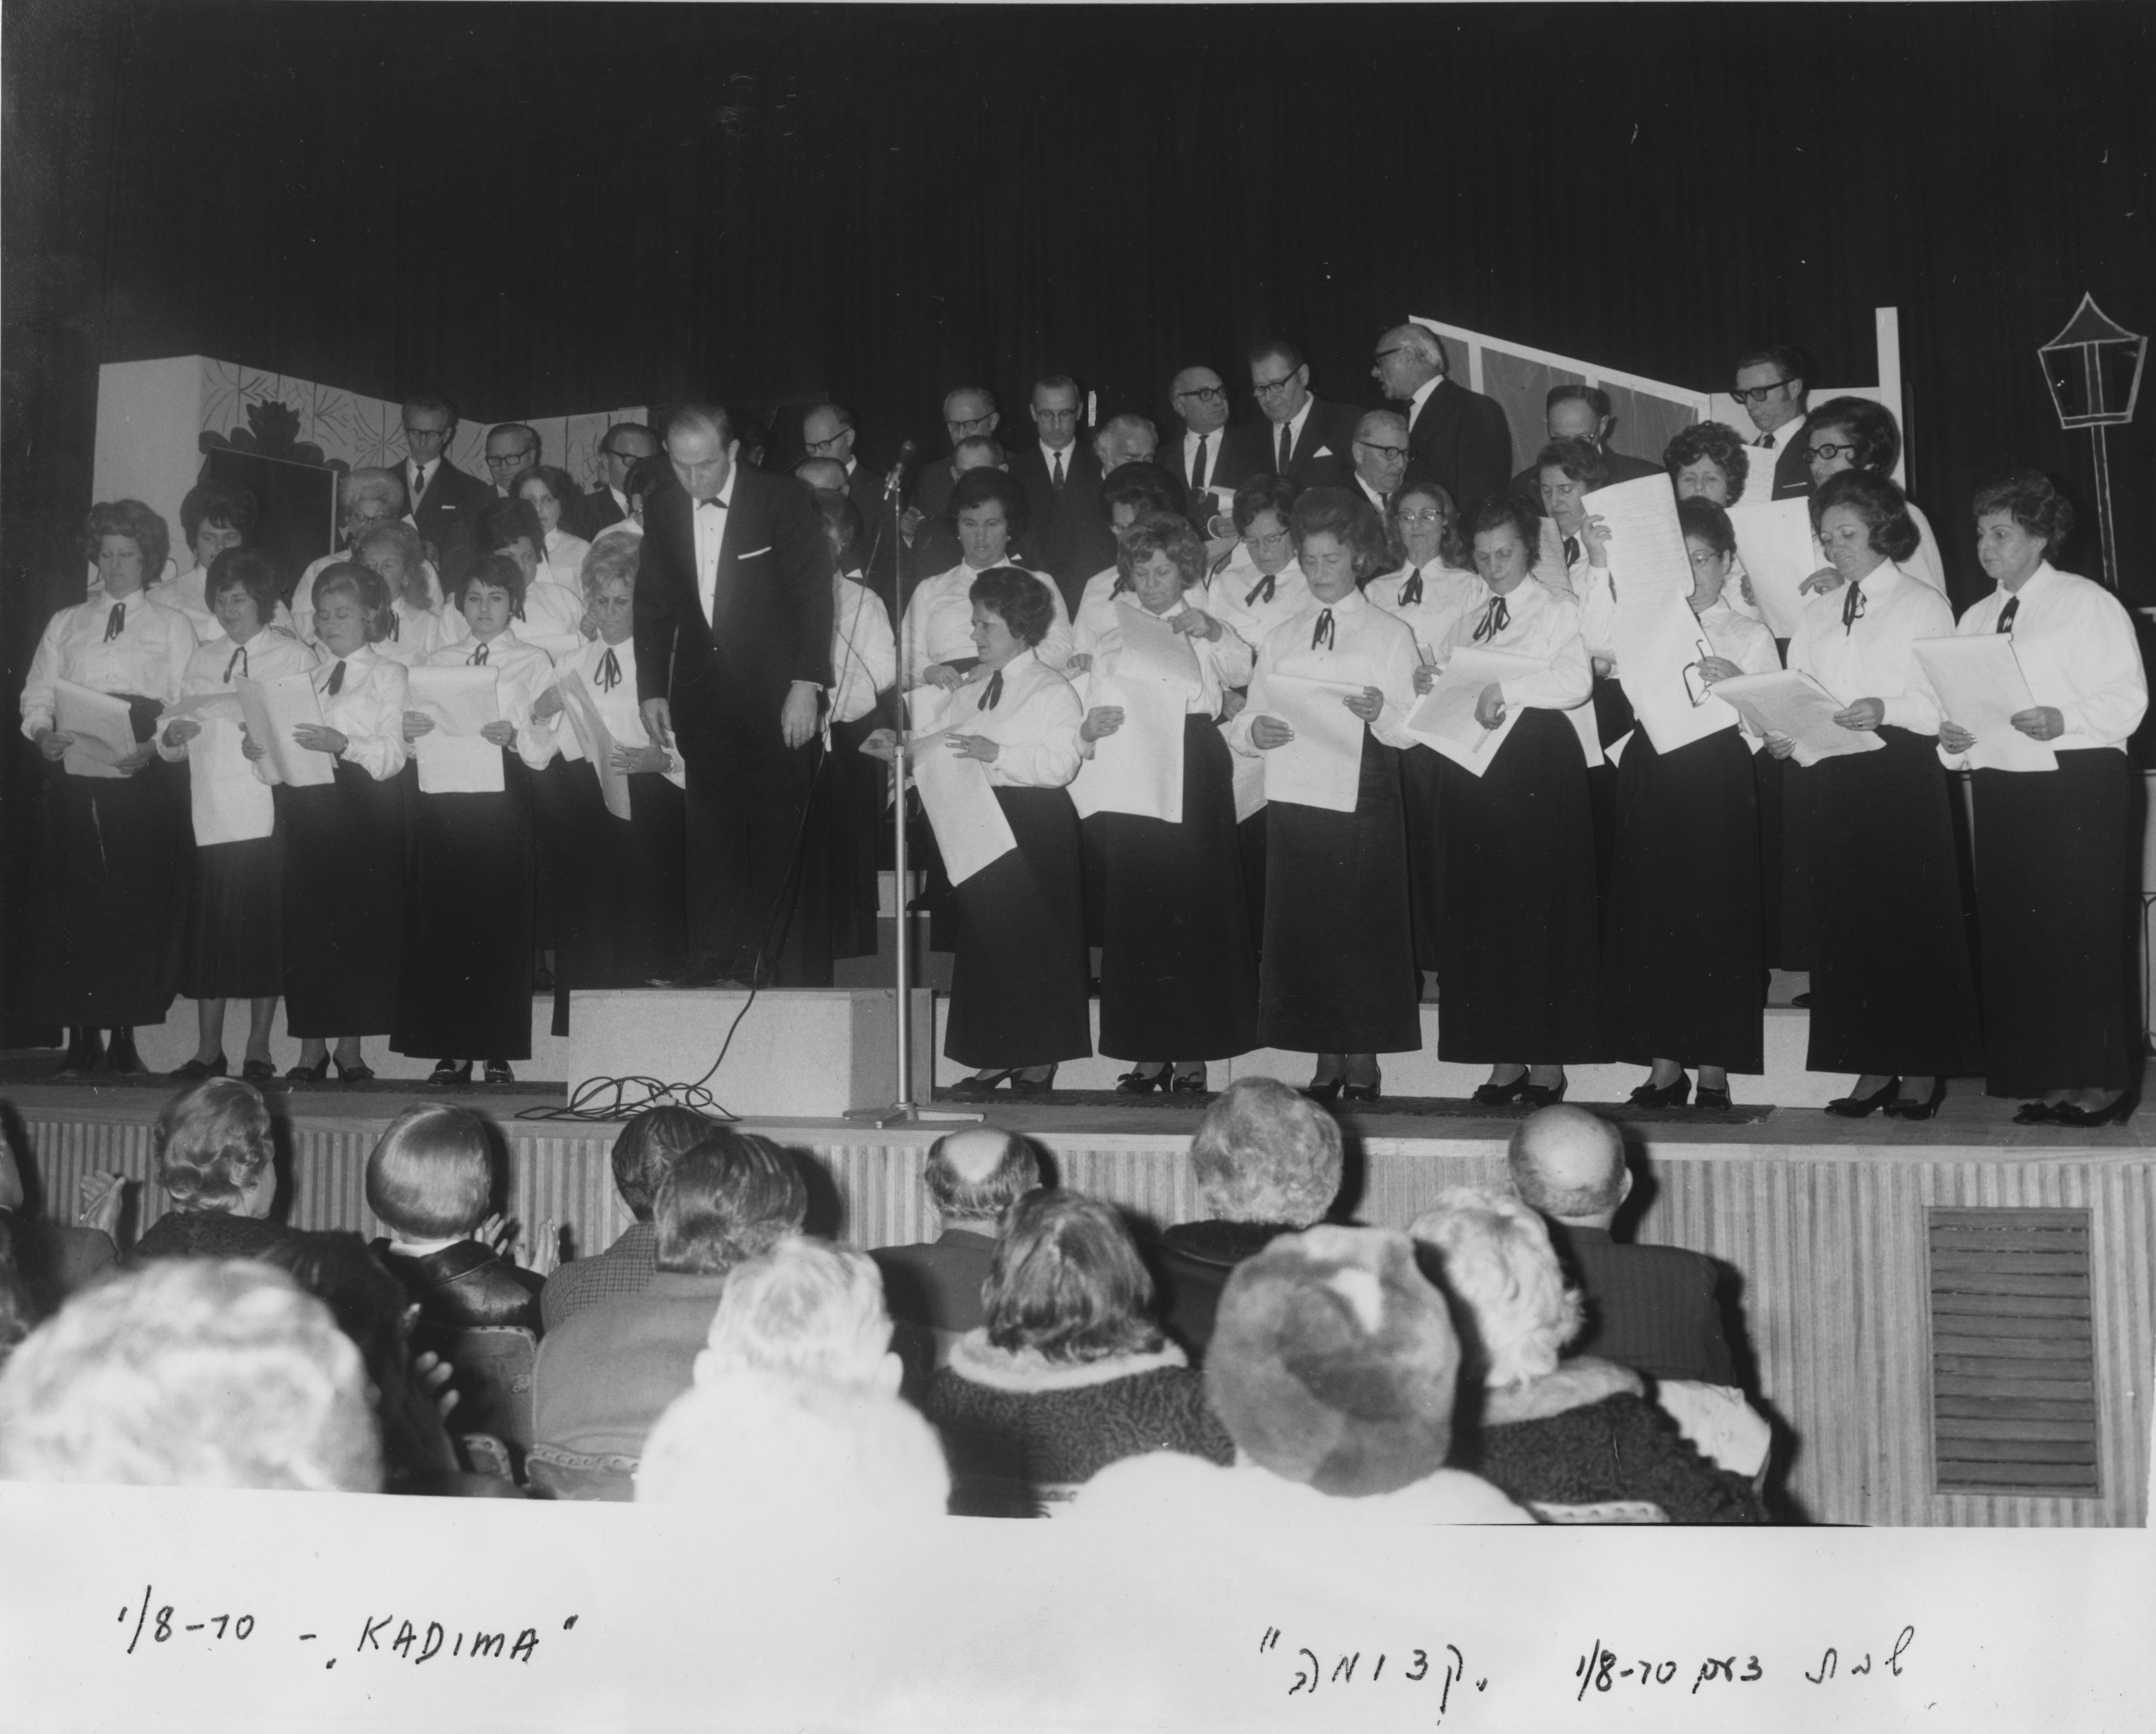 Choir singing on a stage